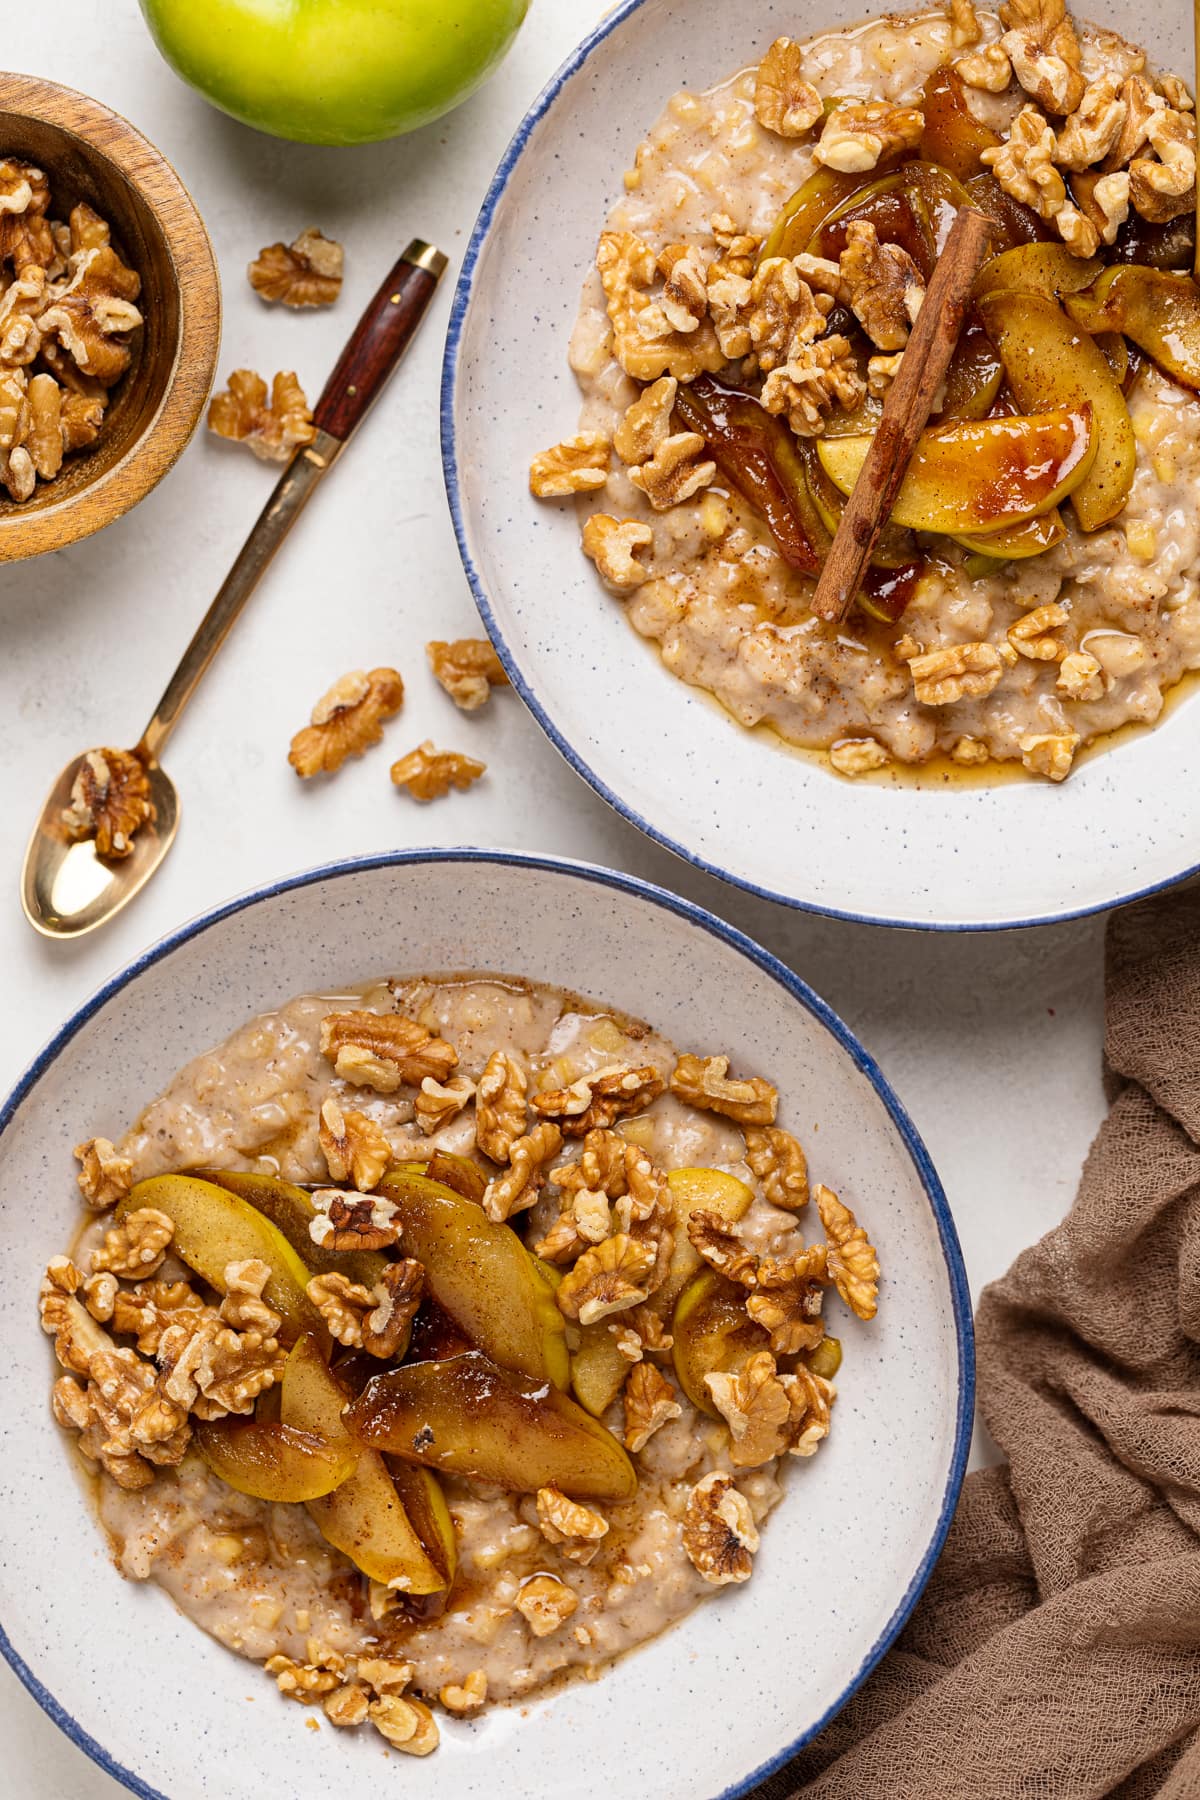 Two bowls of Apple Cinnamon Oatmeal Porridge topped with cinnamon sticks, nuts, and caramelized apples